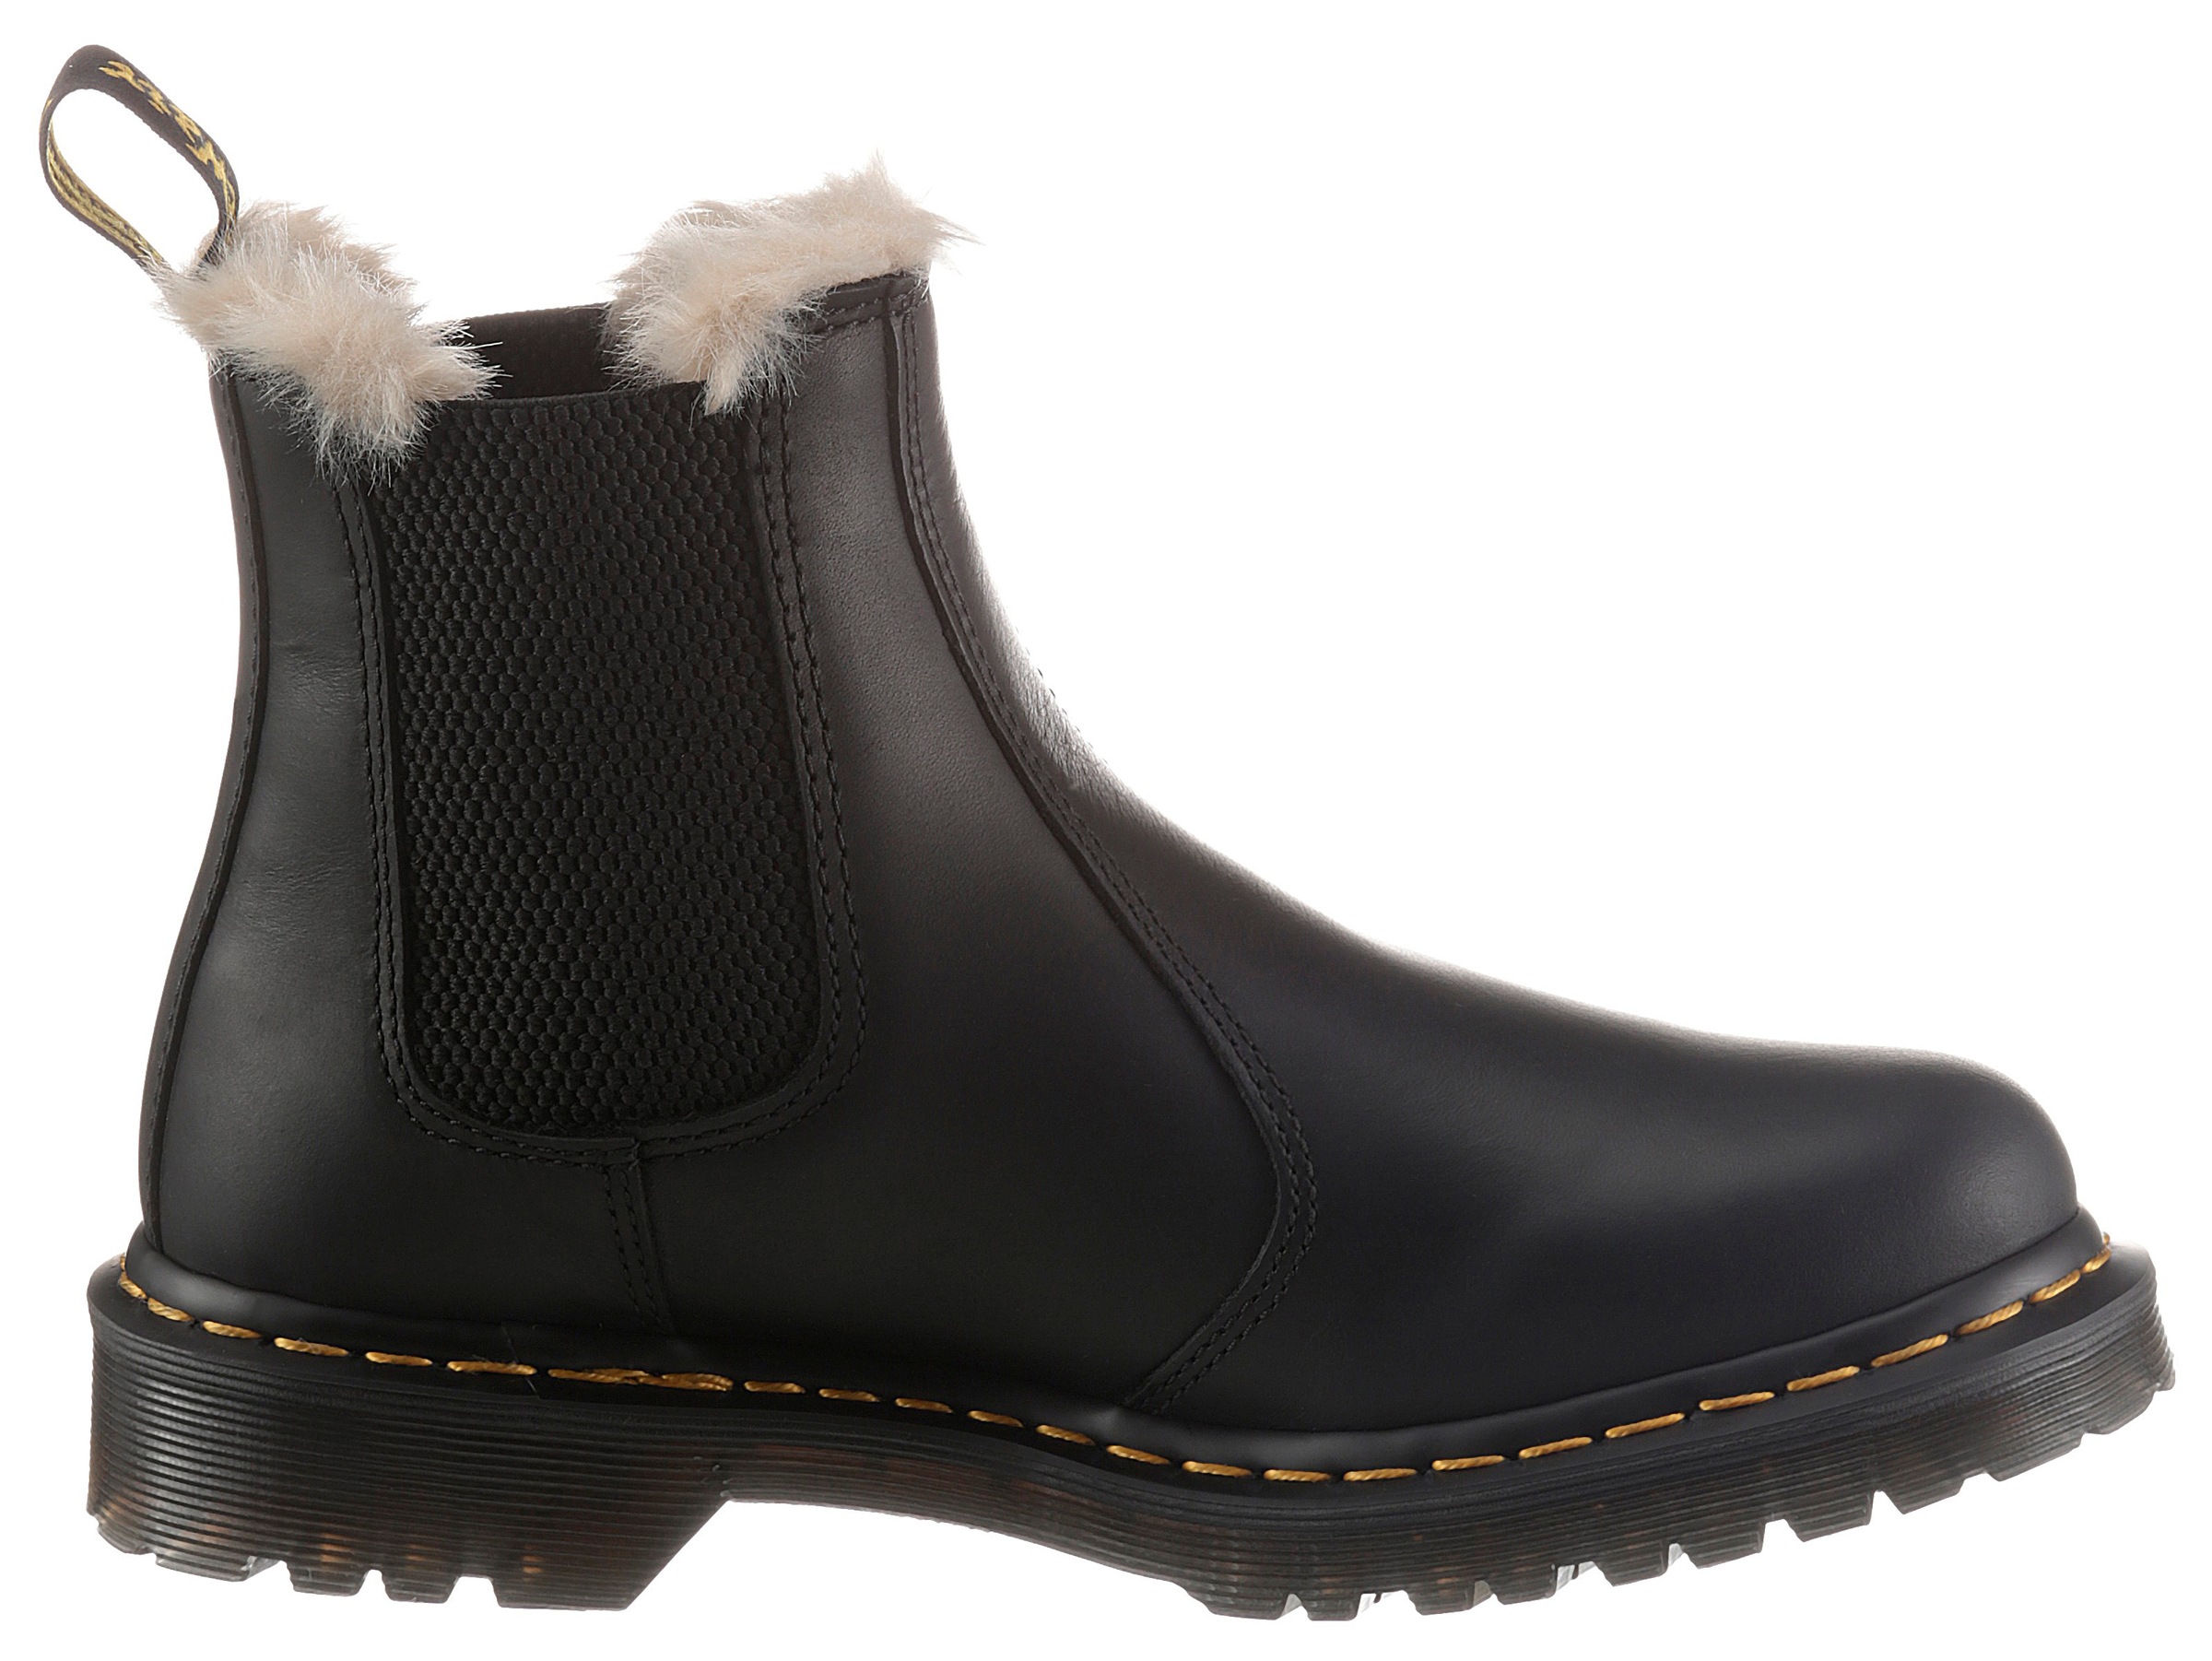 DR. MARTENS Chelseaboots »Leonore«, Chunky Boots, Plateau Schuh, Boots mit Warmfutter